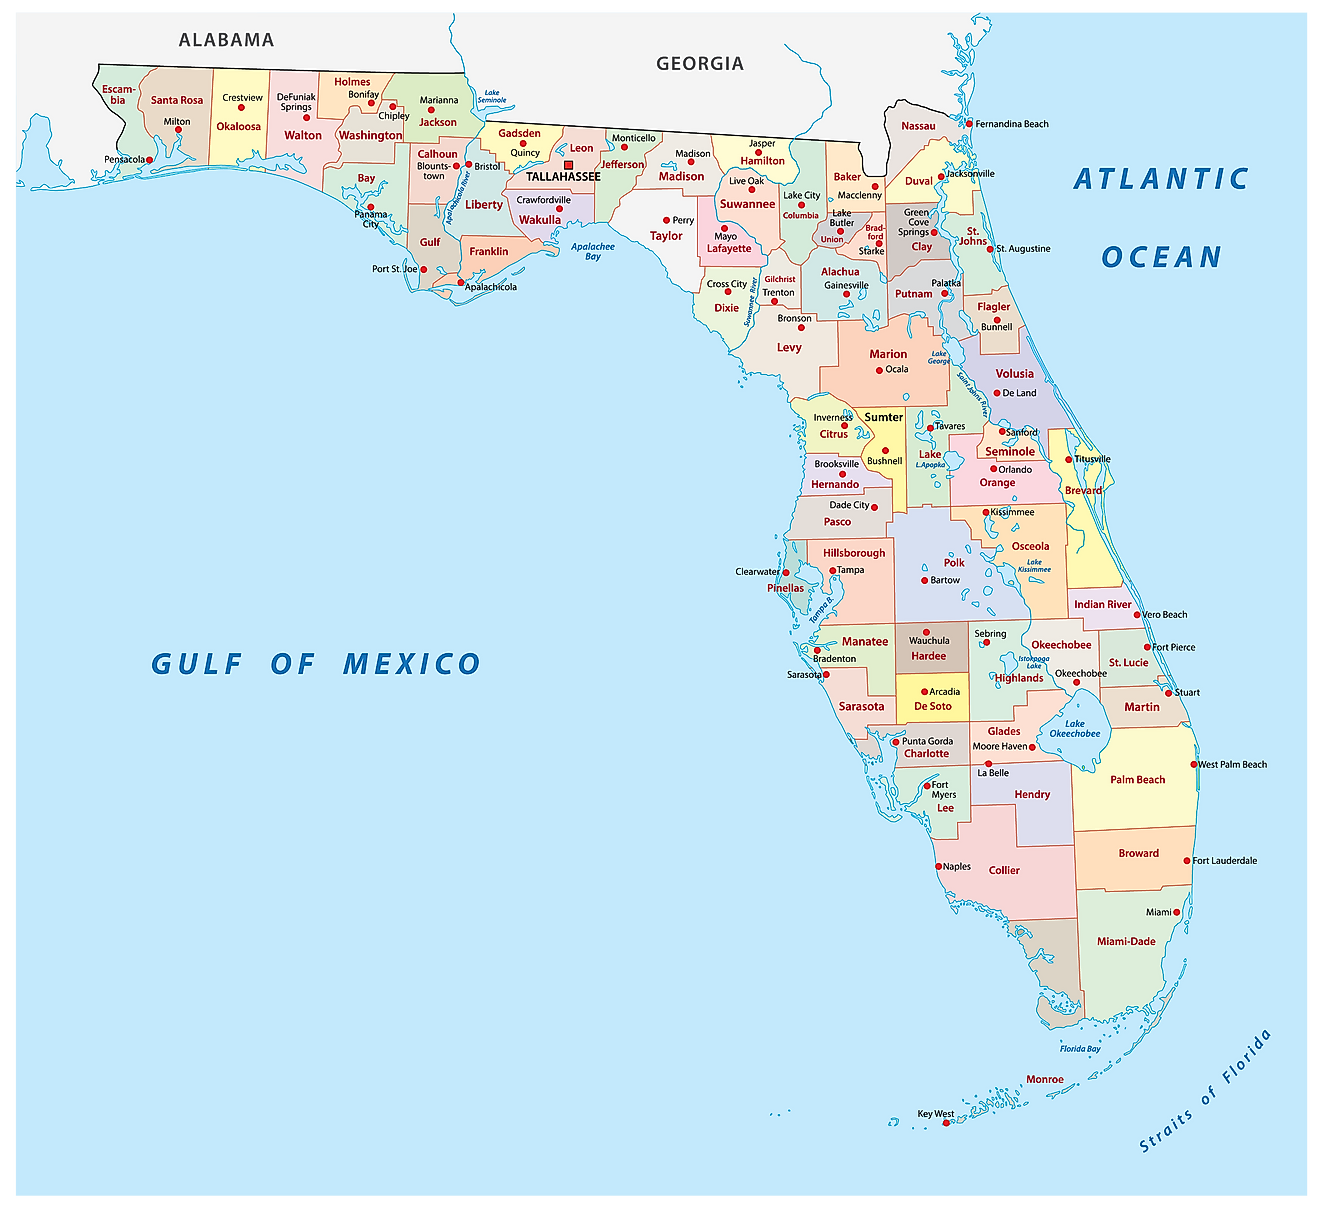 Political Map of Florida showing its 67 counties and its capital city - Tallahassee